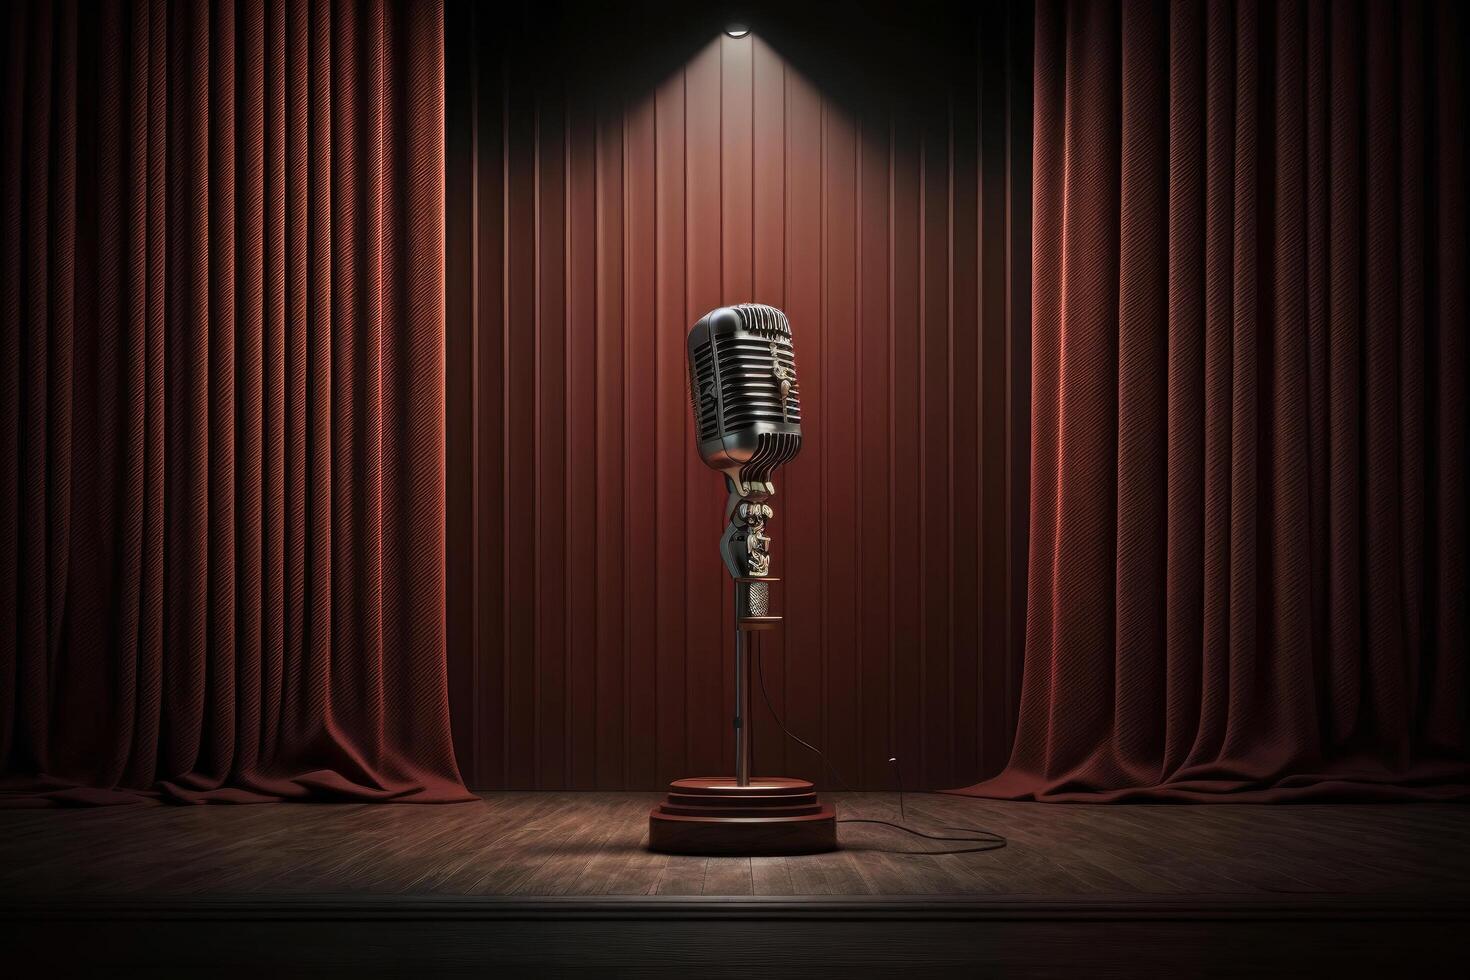 Microphone on stage background. Illustration photo